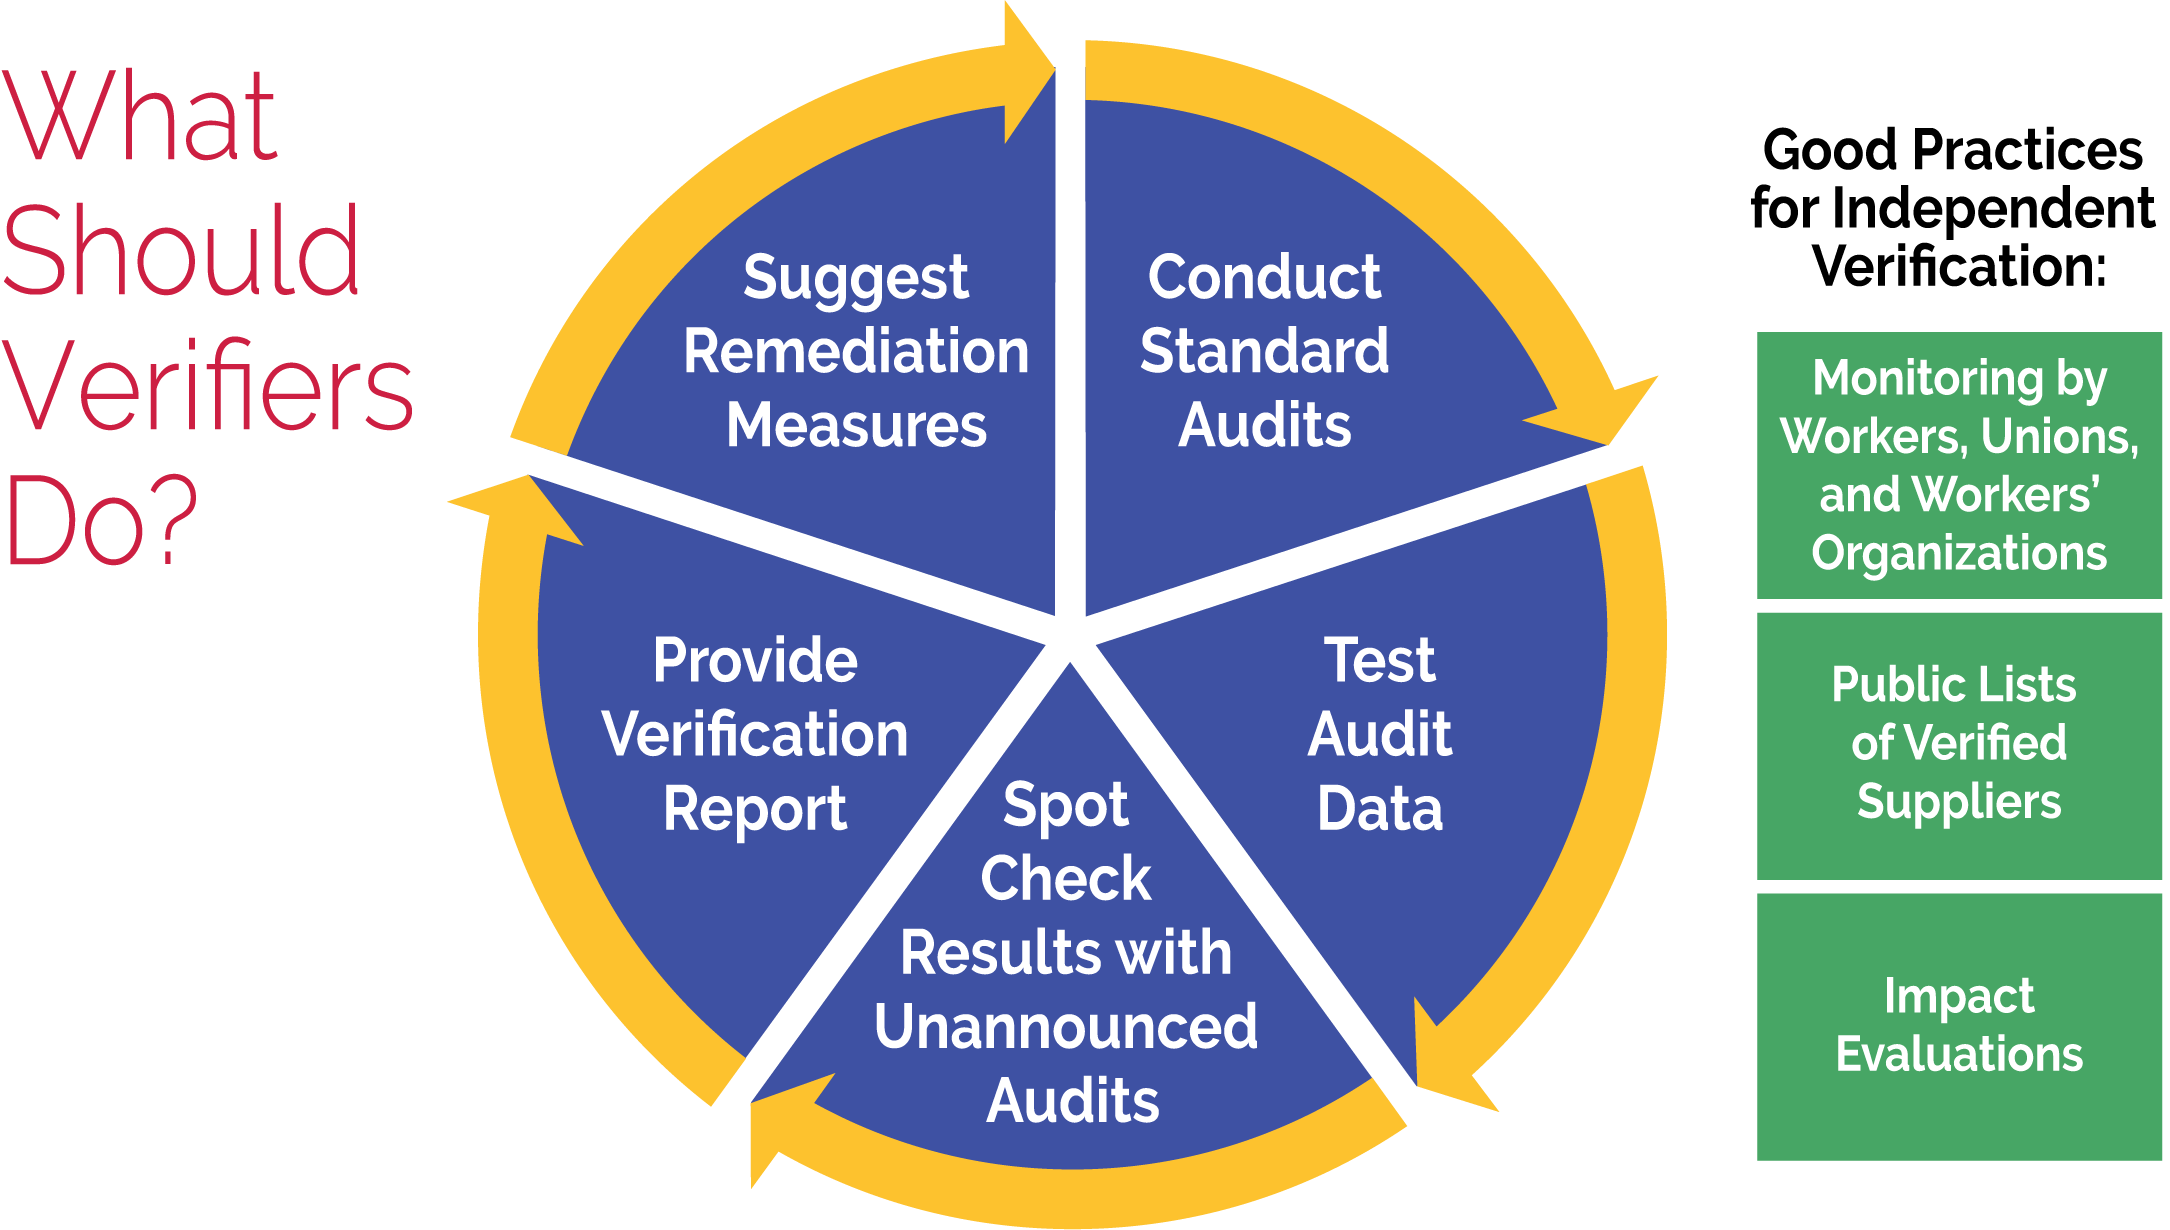 A graphic showing 5 actions verifiers should take and 3 good practices for independent verification